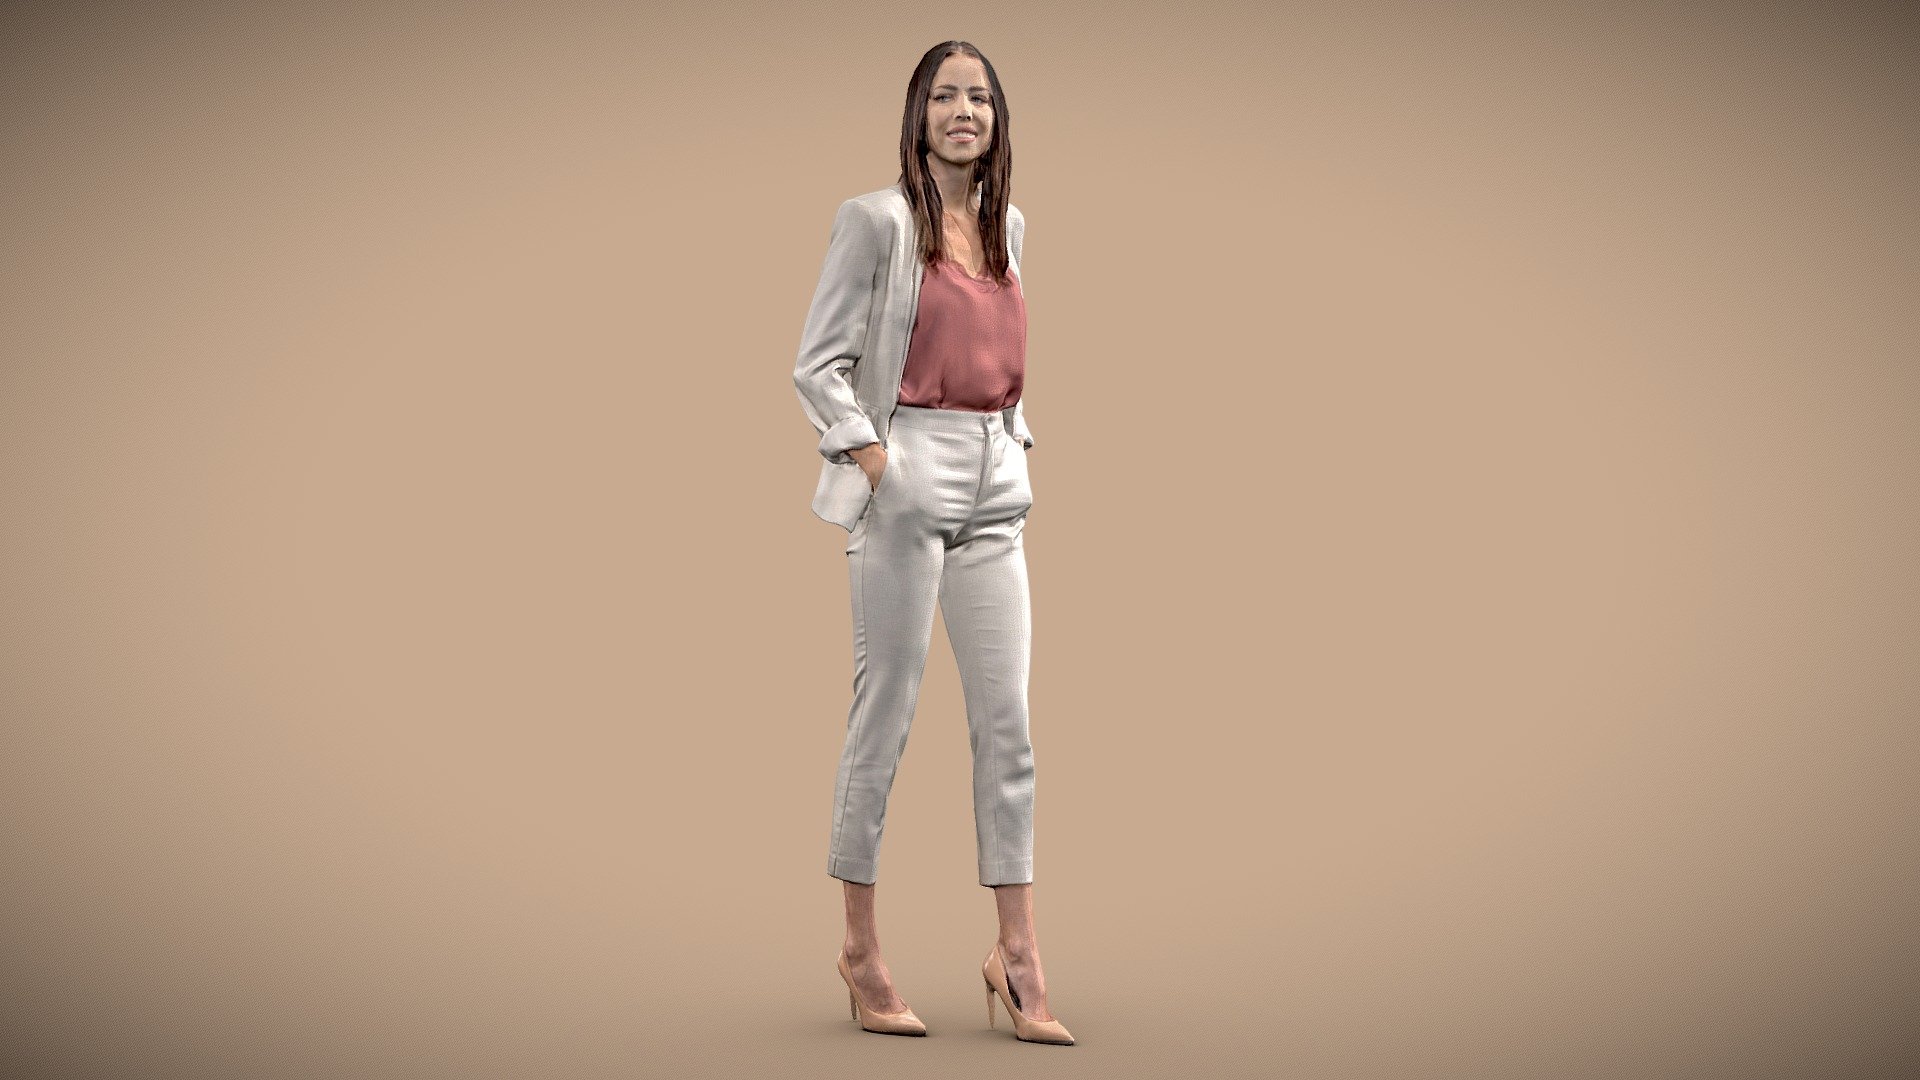 Full body of happy young adult brunette business woman walking with hands in pockets

Wearing light colored suit and high heels

Posed photogrammetry scan with
8192x8192 8k diffuse map
8192x8192 8k normal map
8192x8192 8k roughness map

Included formats blender, fbx, obj + mtl and stl 3d model